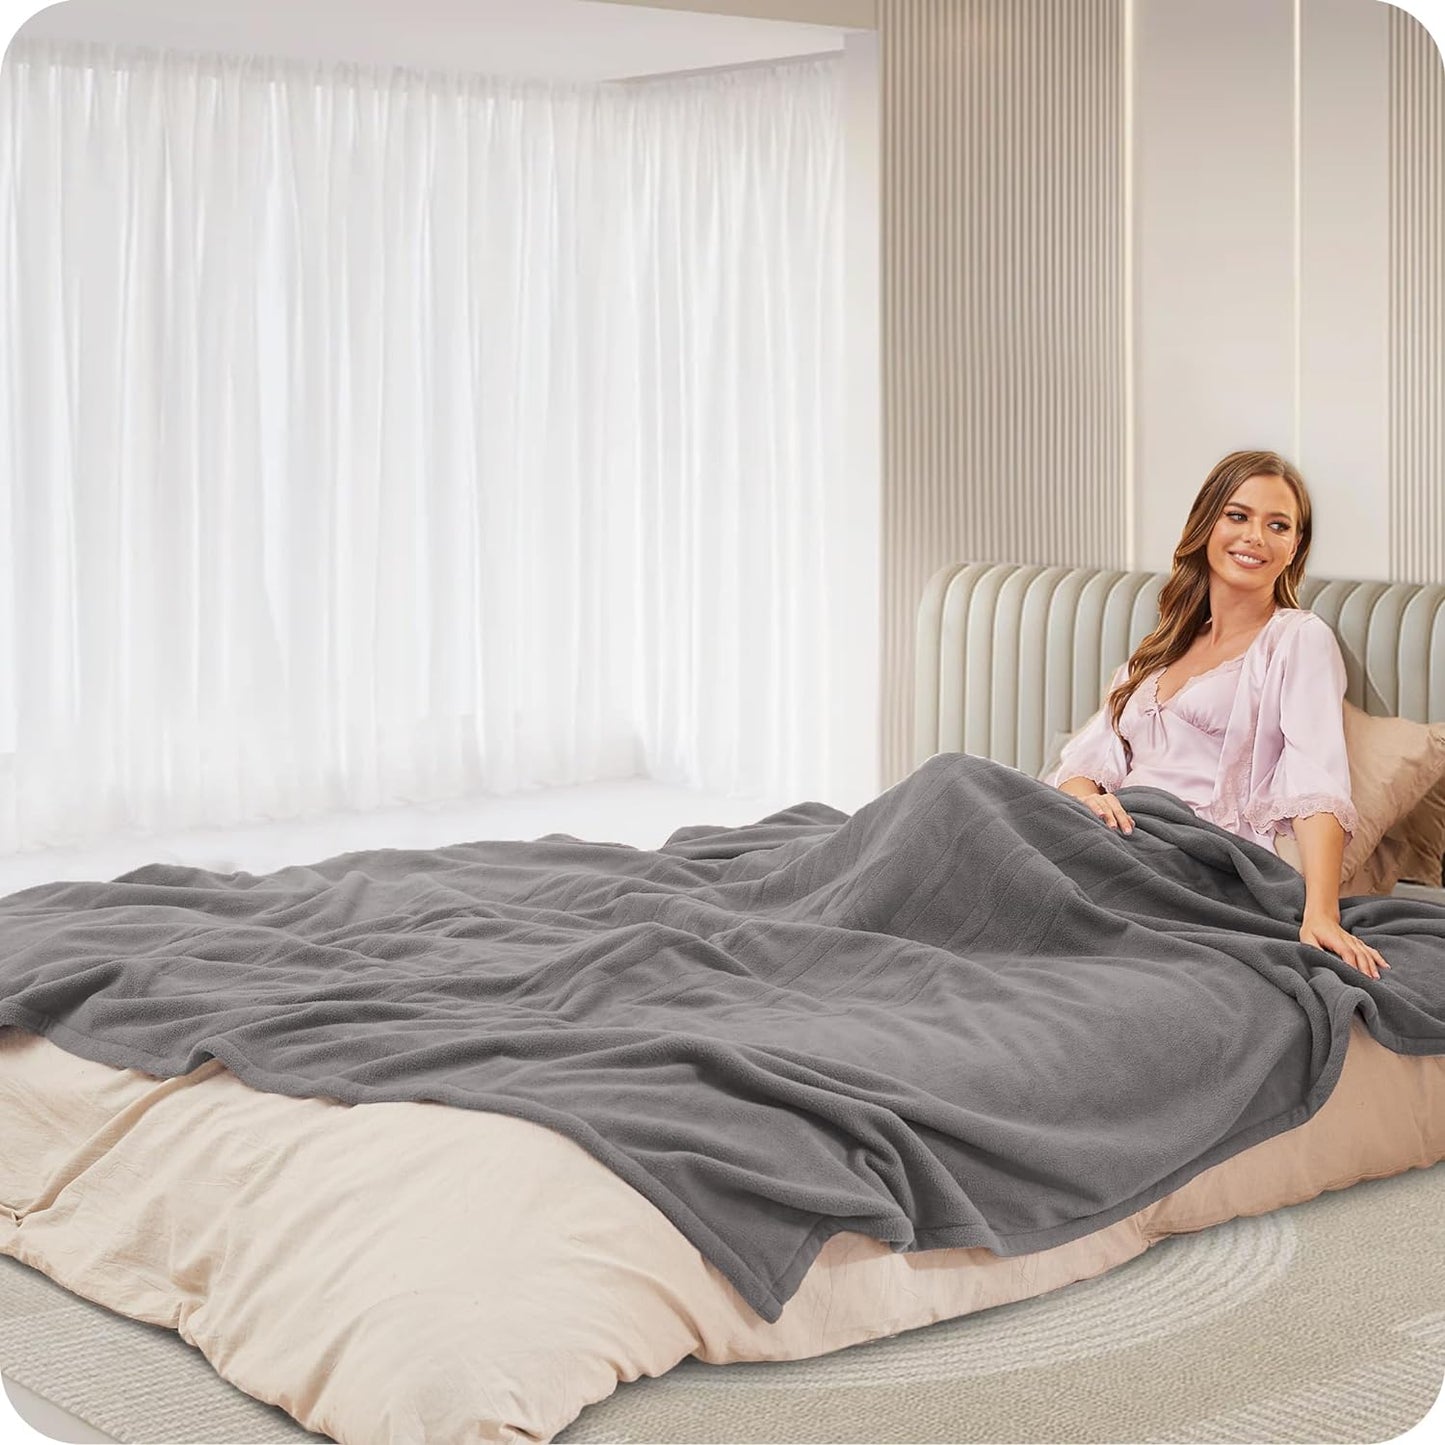 Electric Heated Blanket 72"x84" Full Size Warm Heating Blanket for Whole Body, 4 Heating Levels and 10 Hours Auto-Off Overheating Protection, Grey